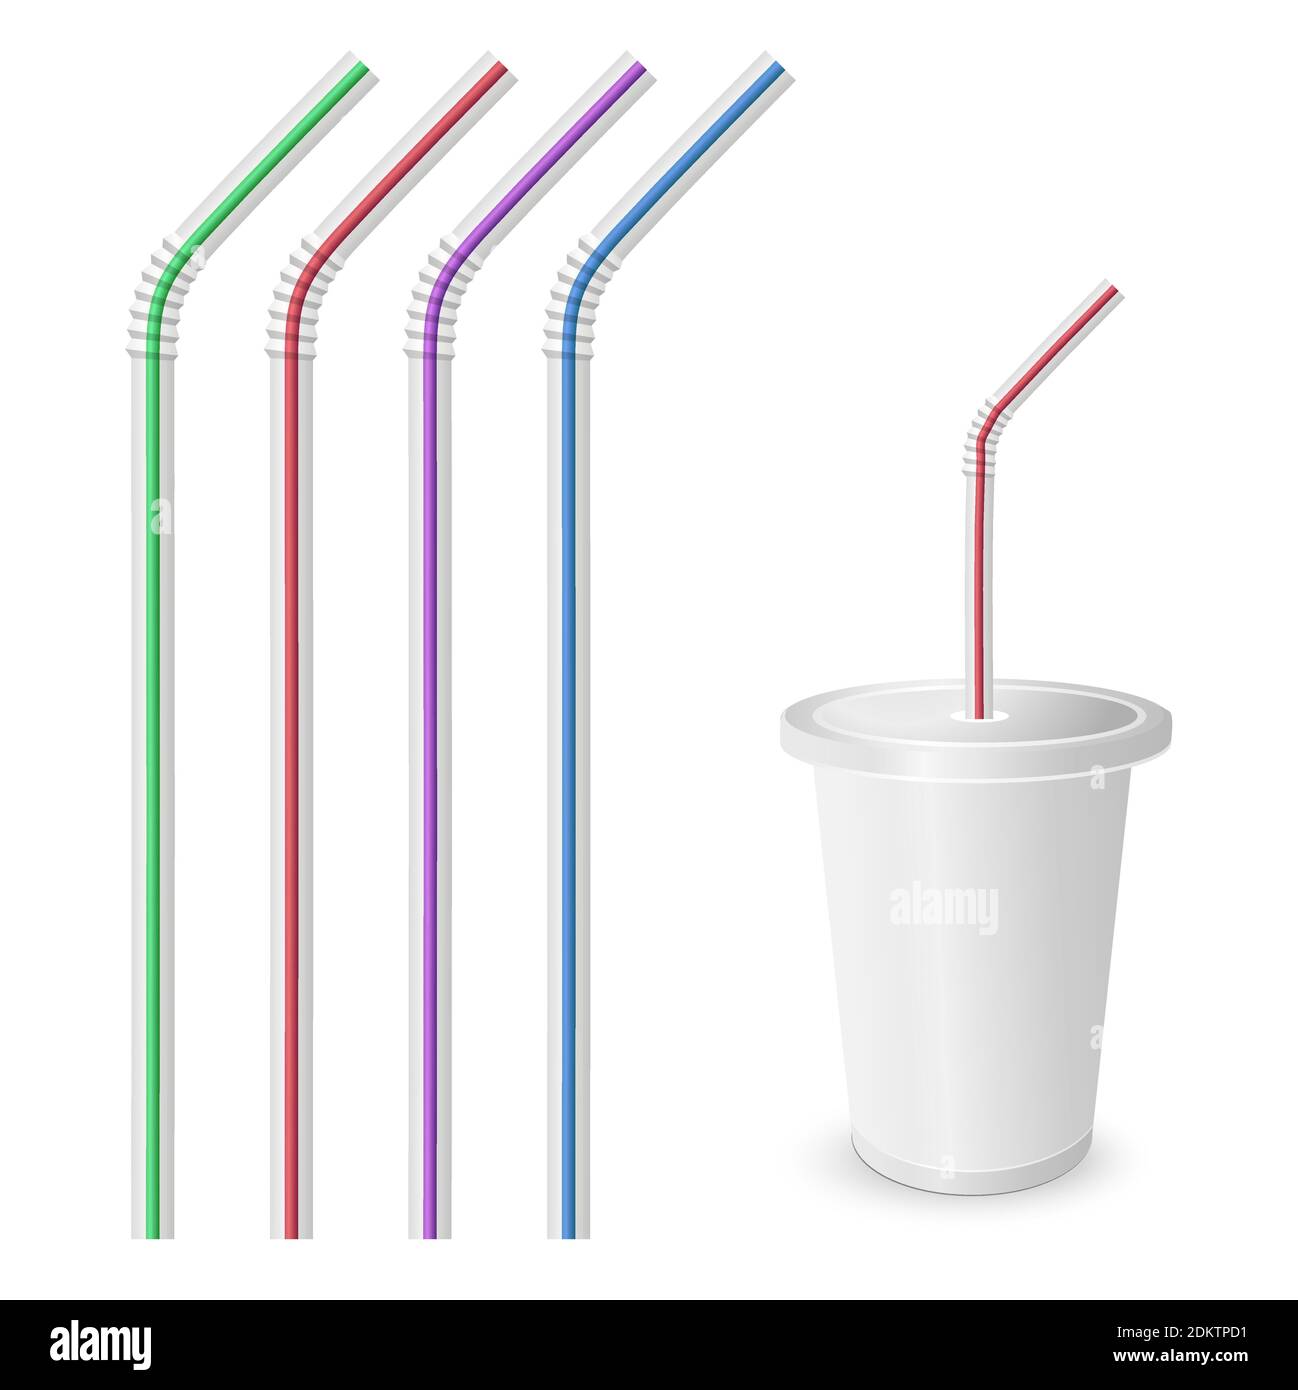 https://c8.alamy.com/comp/2DKTPD1/straw-for-beverage-striped-and-colorful-straws-drinking-straws-isolated-on-a-white-background-plastic-fastfood-cup-for-beverages-with-straw-2DKTPD1.jpg